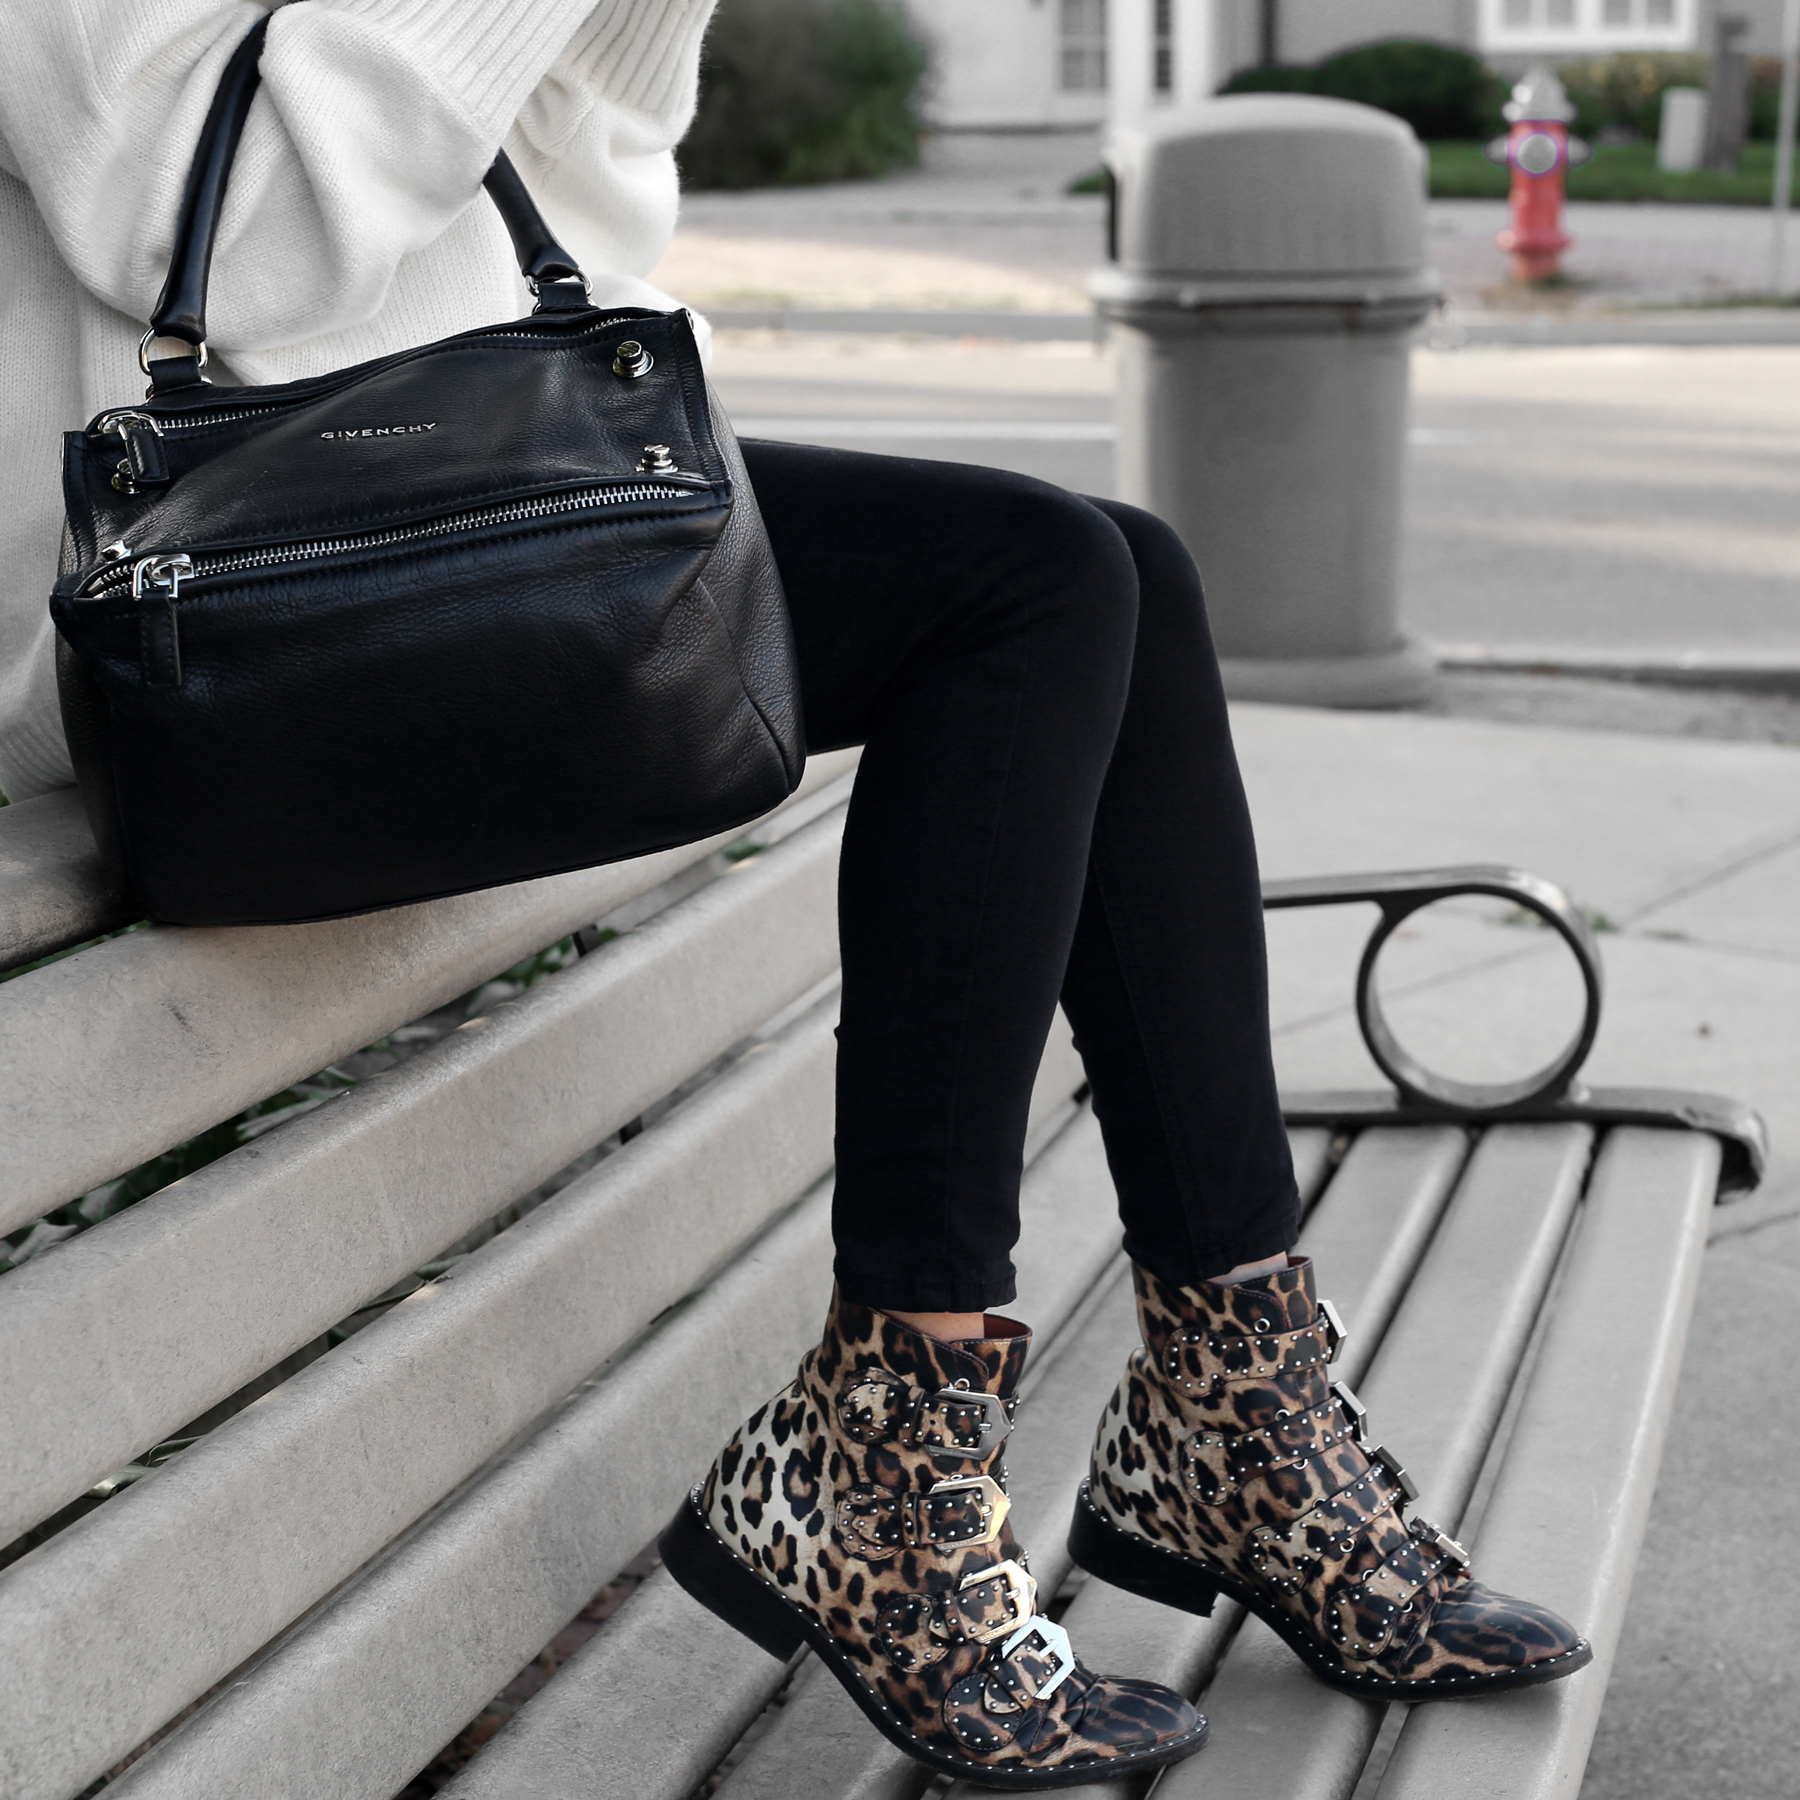 Winter White oversized knit, coat, leather leggings, Givenchy leopard print studded boots and Givenchy Pandora bag street style_2282.JPG